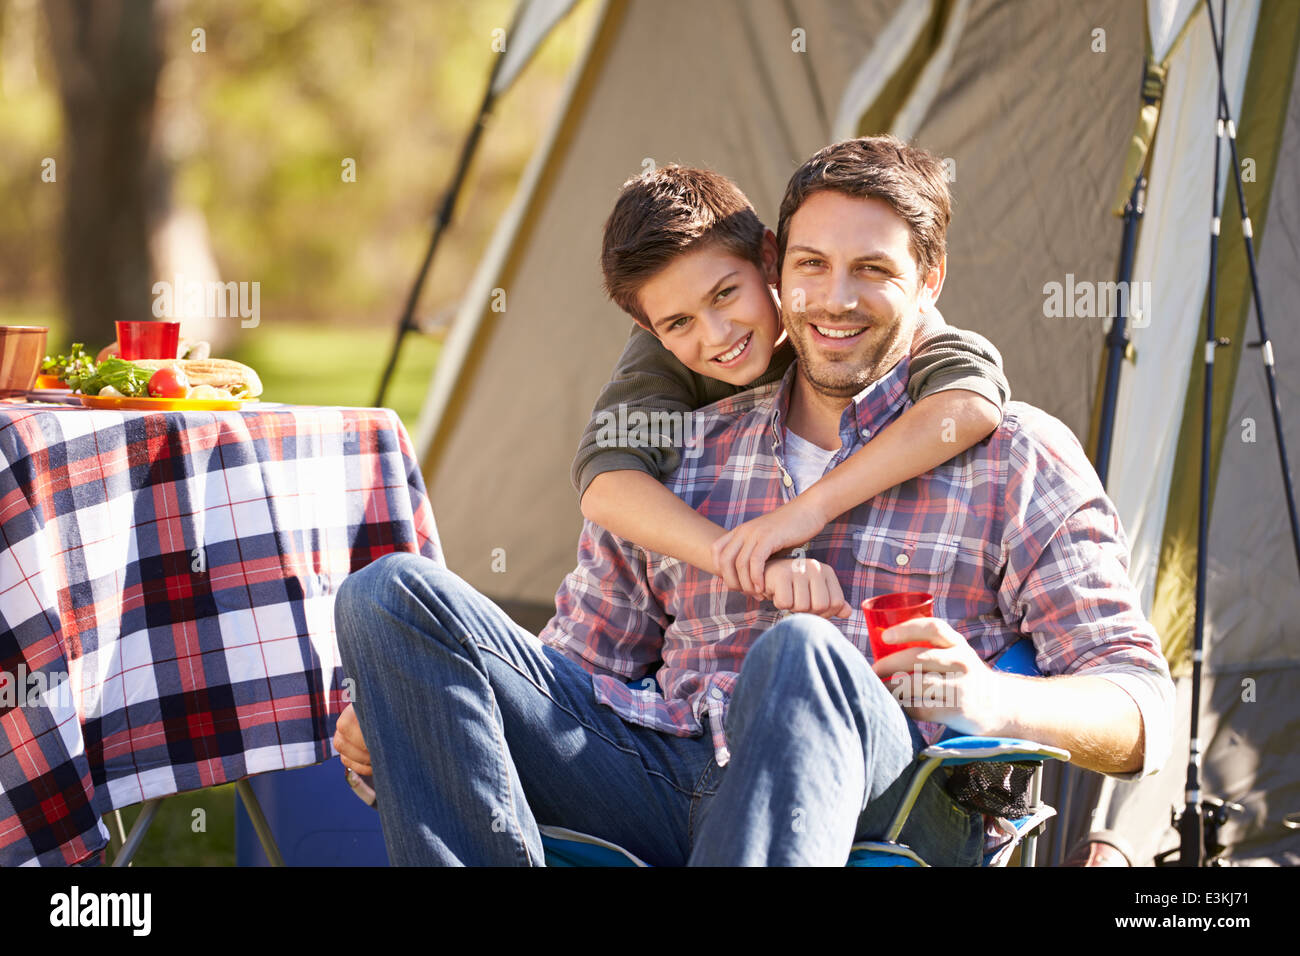 Father And Son Enjoying Camping Holiday In Countryside Stock Photo